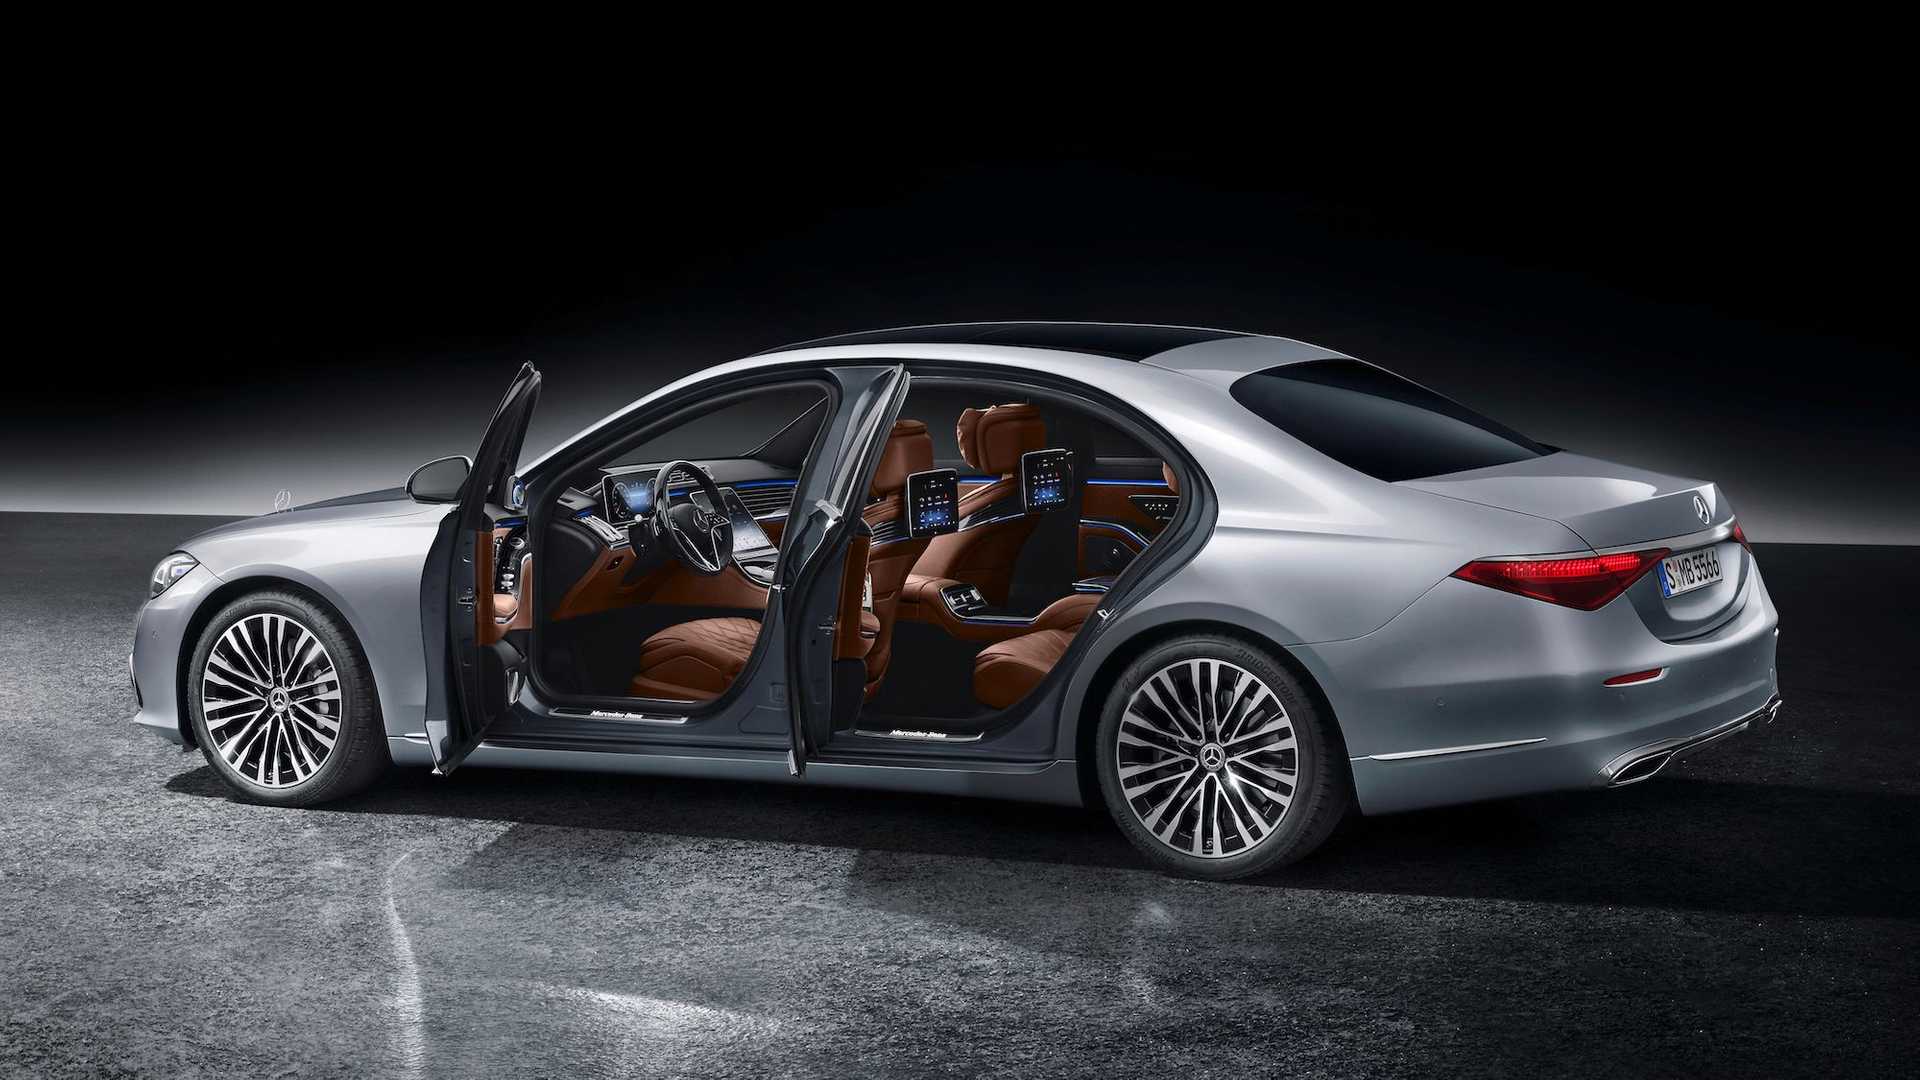 All New 2021 Mercedes Benz S Class Finally Revealed + Video & Photo